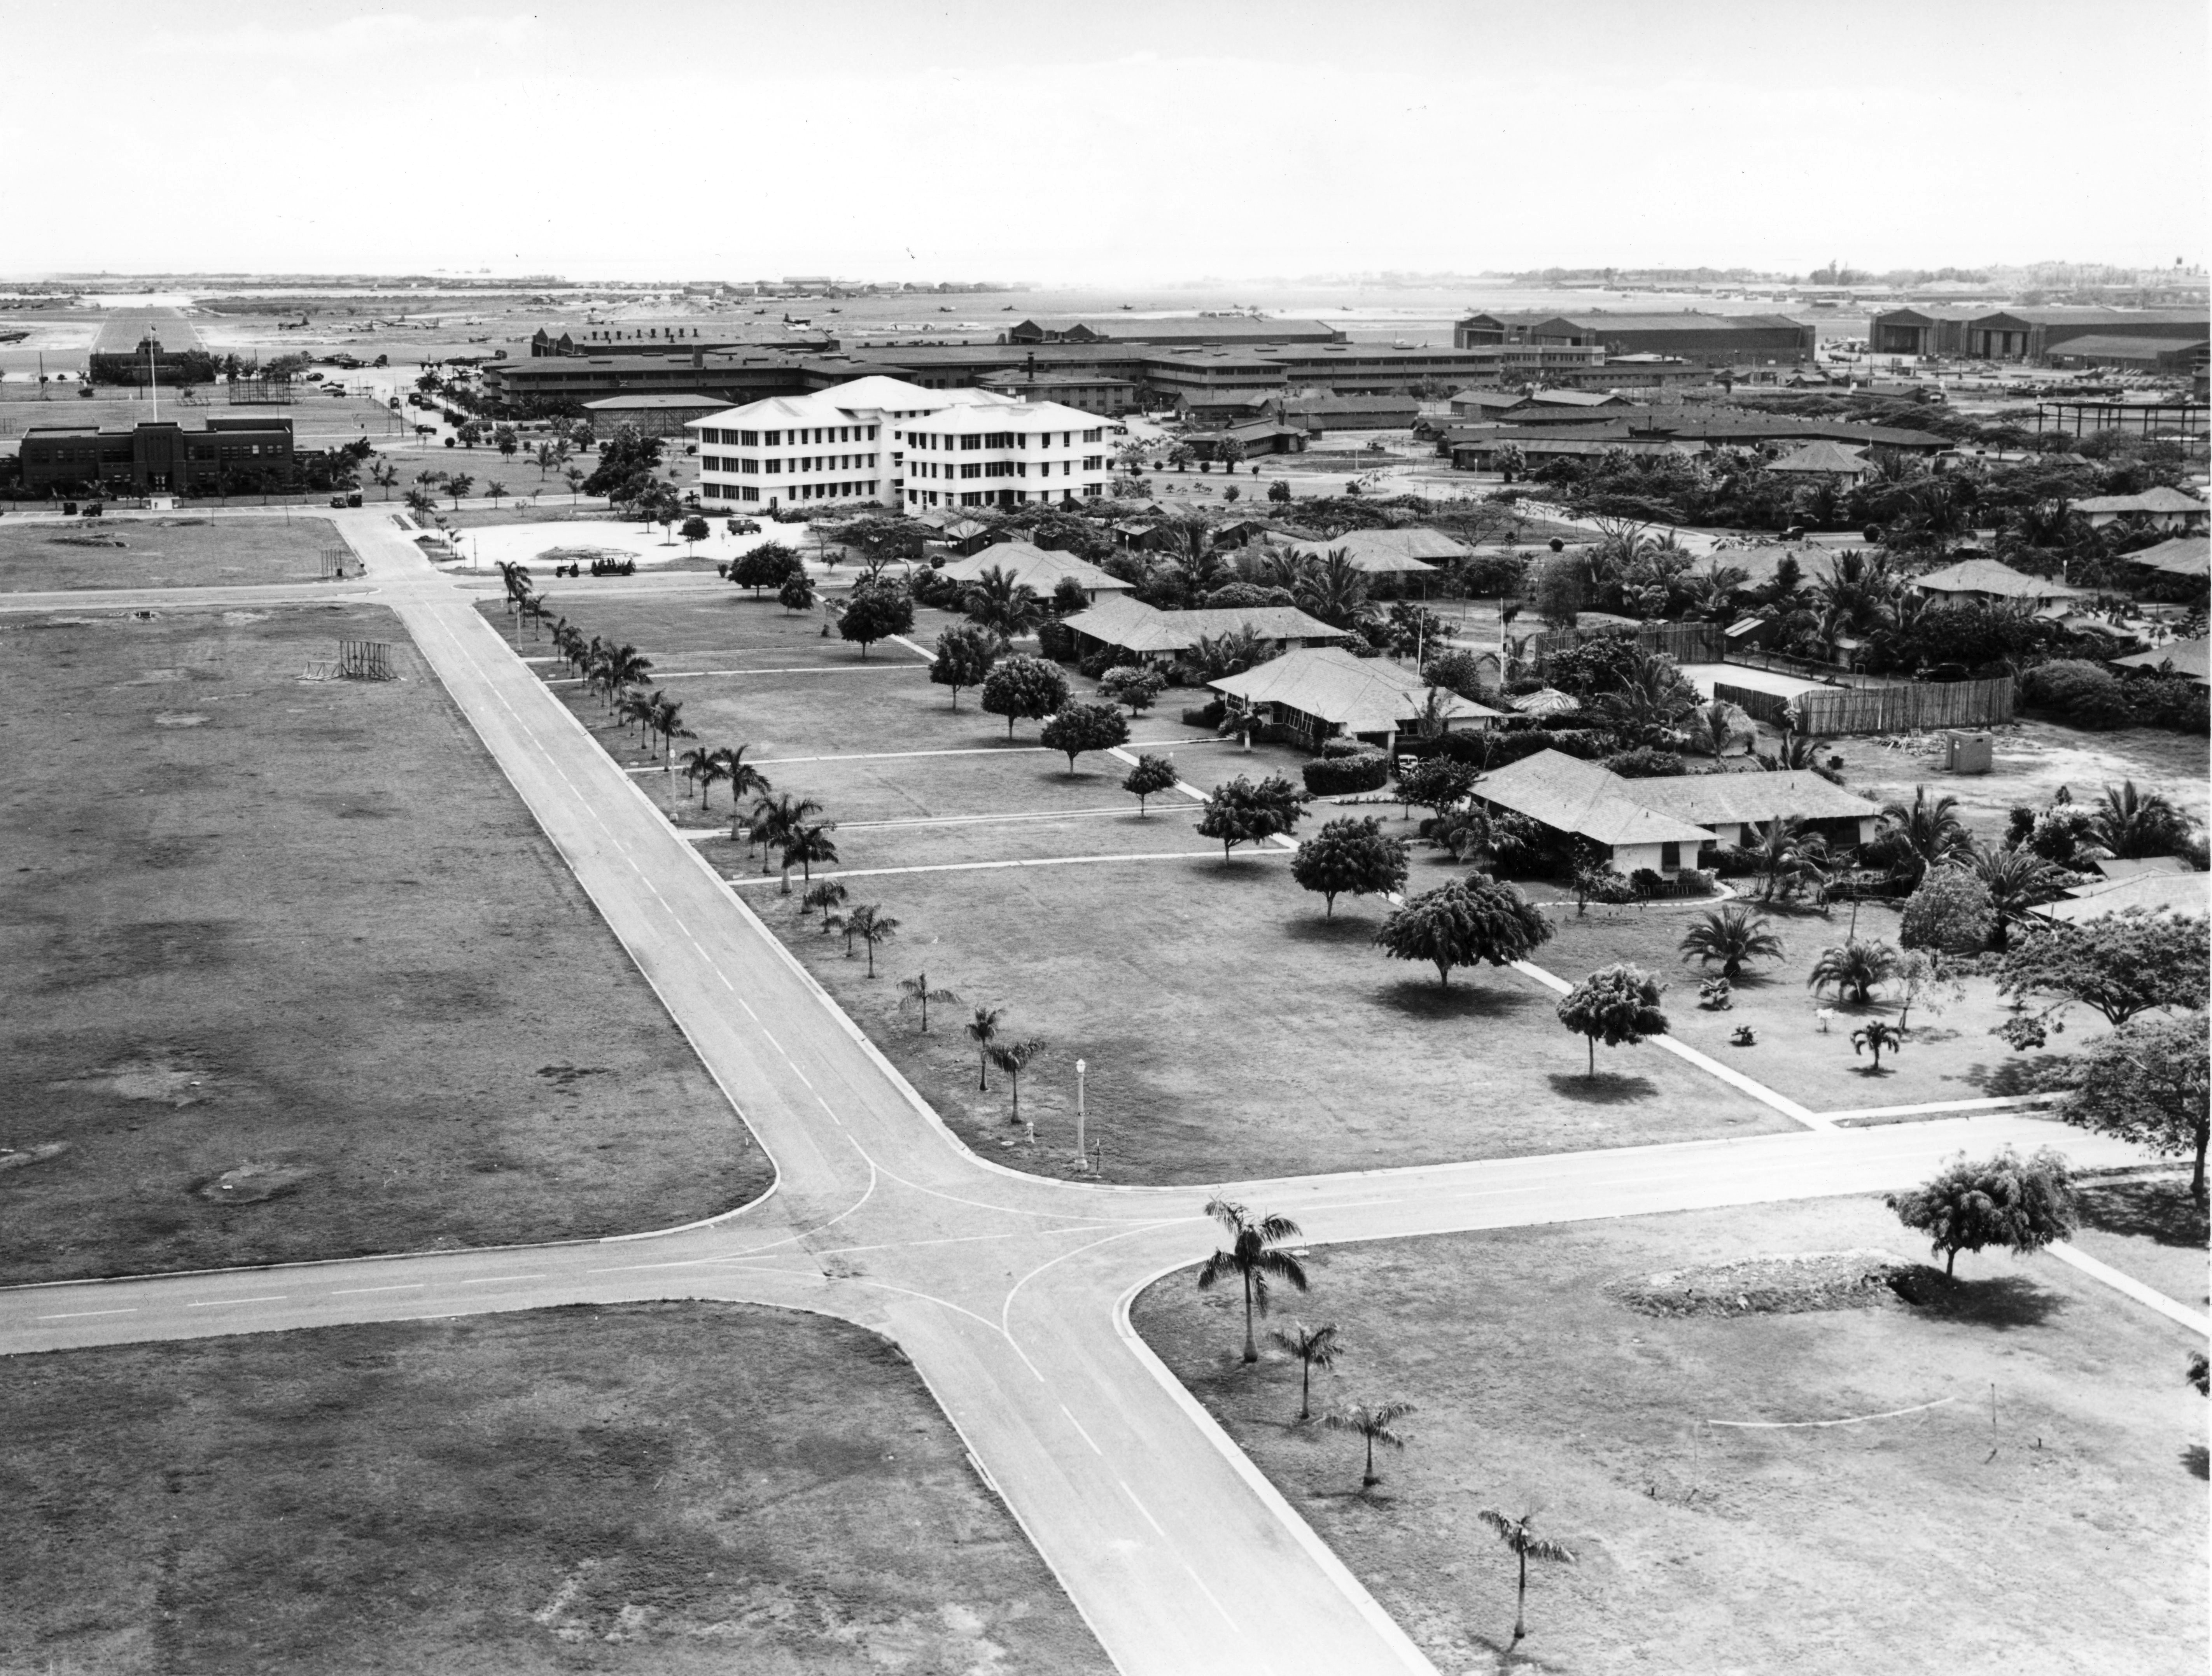 Hospital at Hickam Field, Oahu, US Territory of Hawaii, as seen from the base water tower, 1941